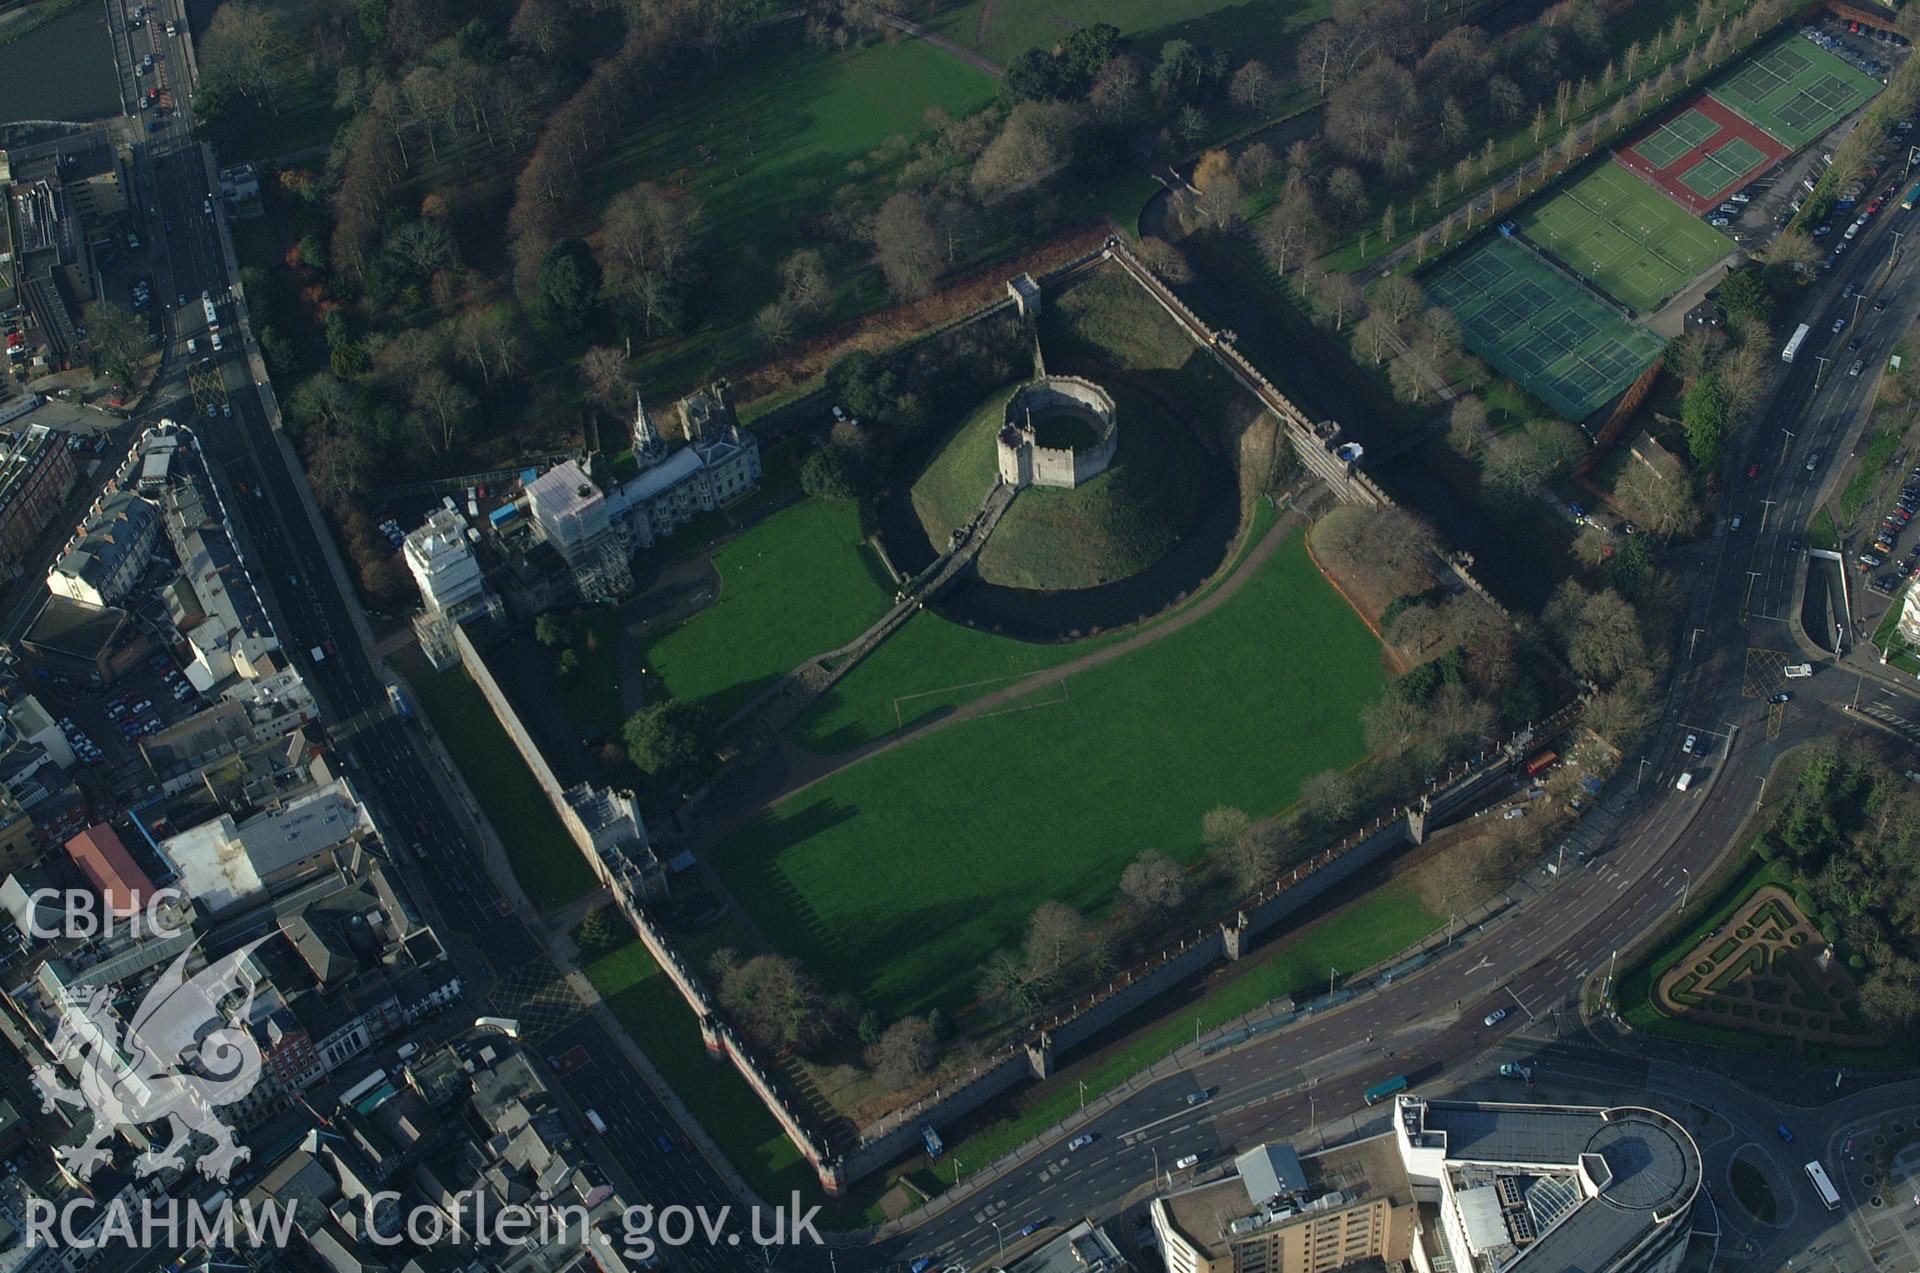 RCAHMW colour oblique aerial photograph of Cardiff Castle taken on 13/01/2005 by Toby Driver